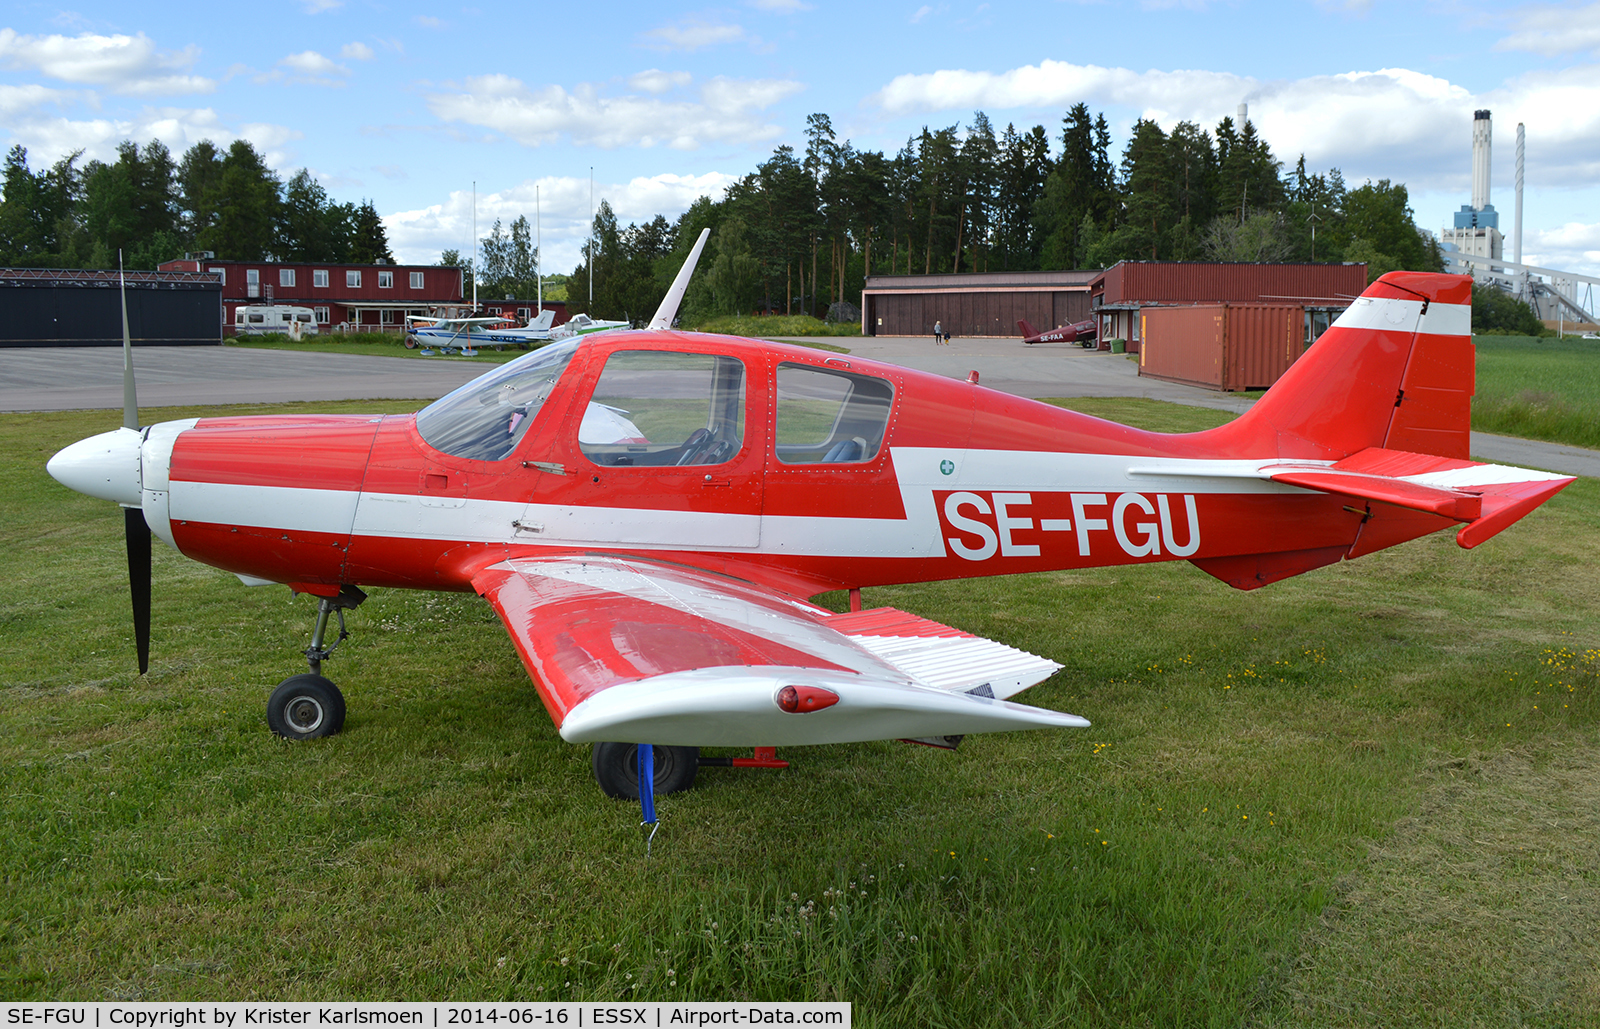 SE-FGU, 1967 Beagle B-121 Pup Series 2 (Pup 150) C/N B121-068, One of few flying in Sweden.